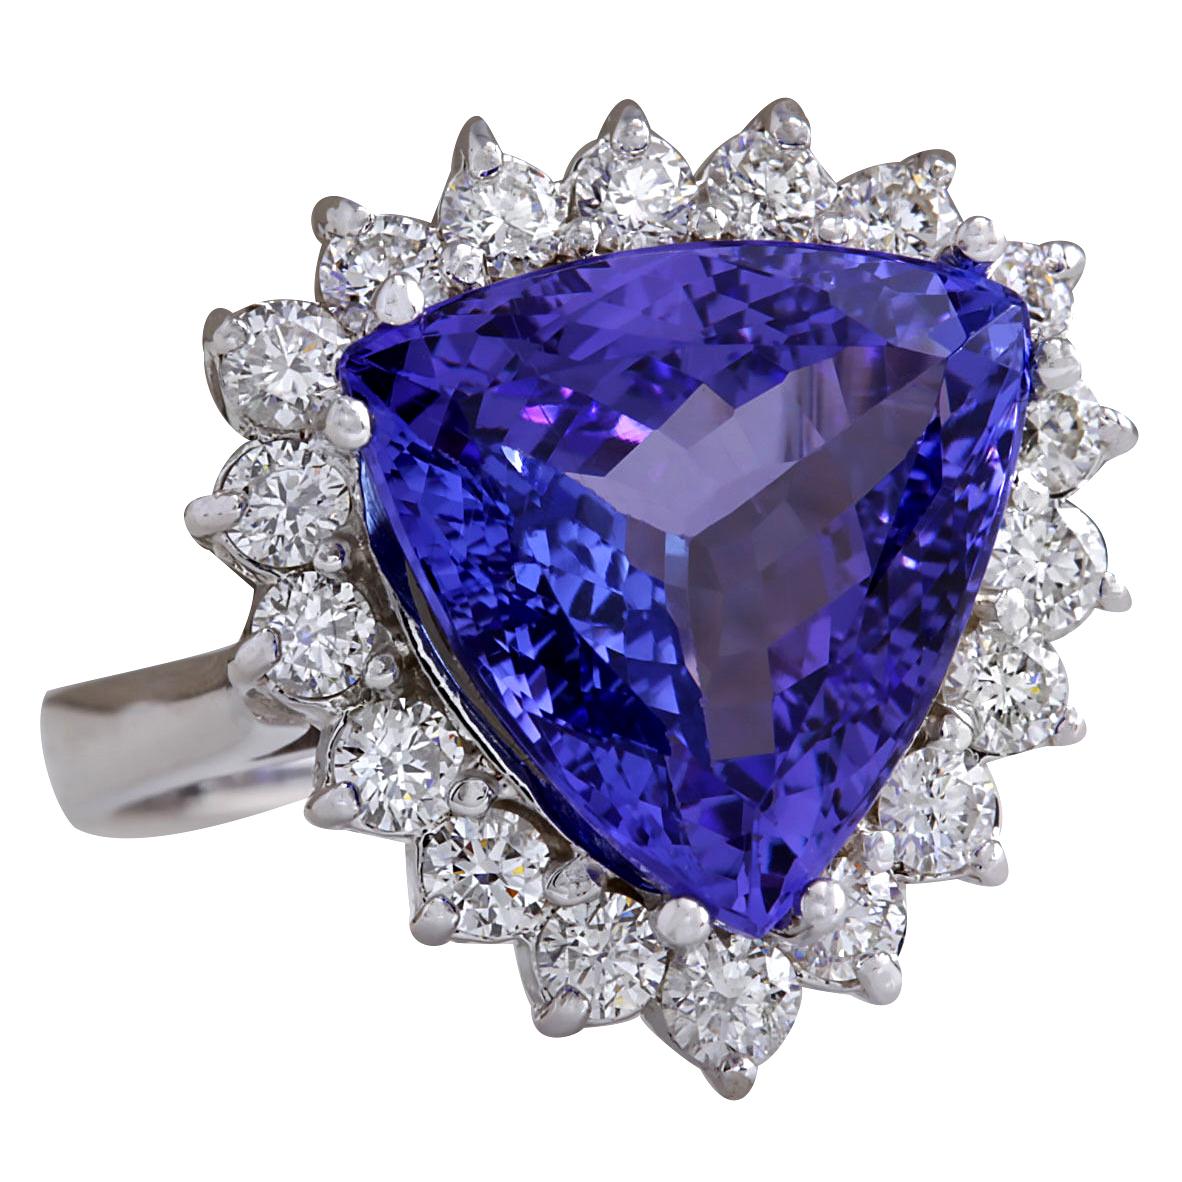 Introducing our exquisite 8.12 Carat Tanzanite 14 Karat White Gold Diamond Ring. Crafted from stamped 14K White Gold, this ring has a total weight of 6.8 grams, ensuring both quality and durability. The centerpiece is a stunning trillion-cut